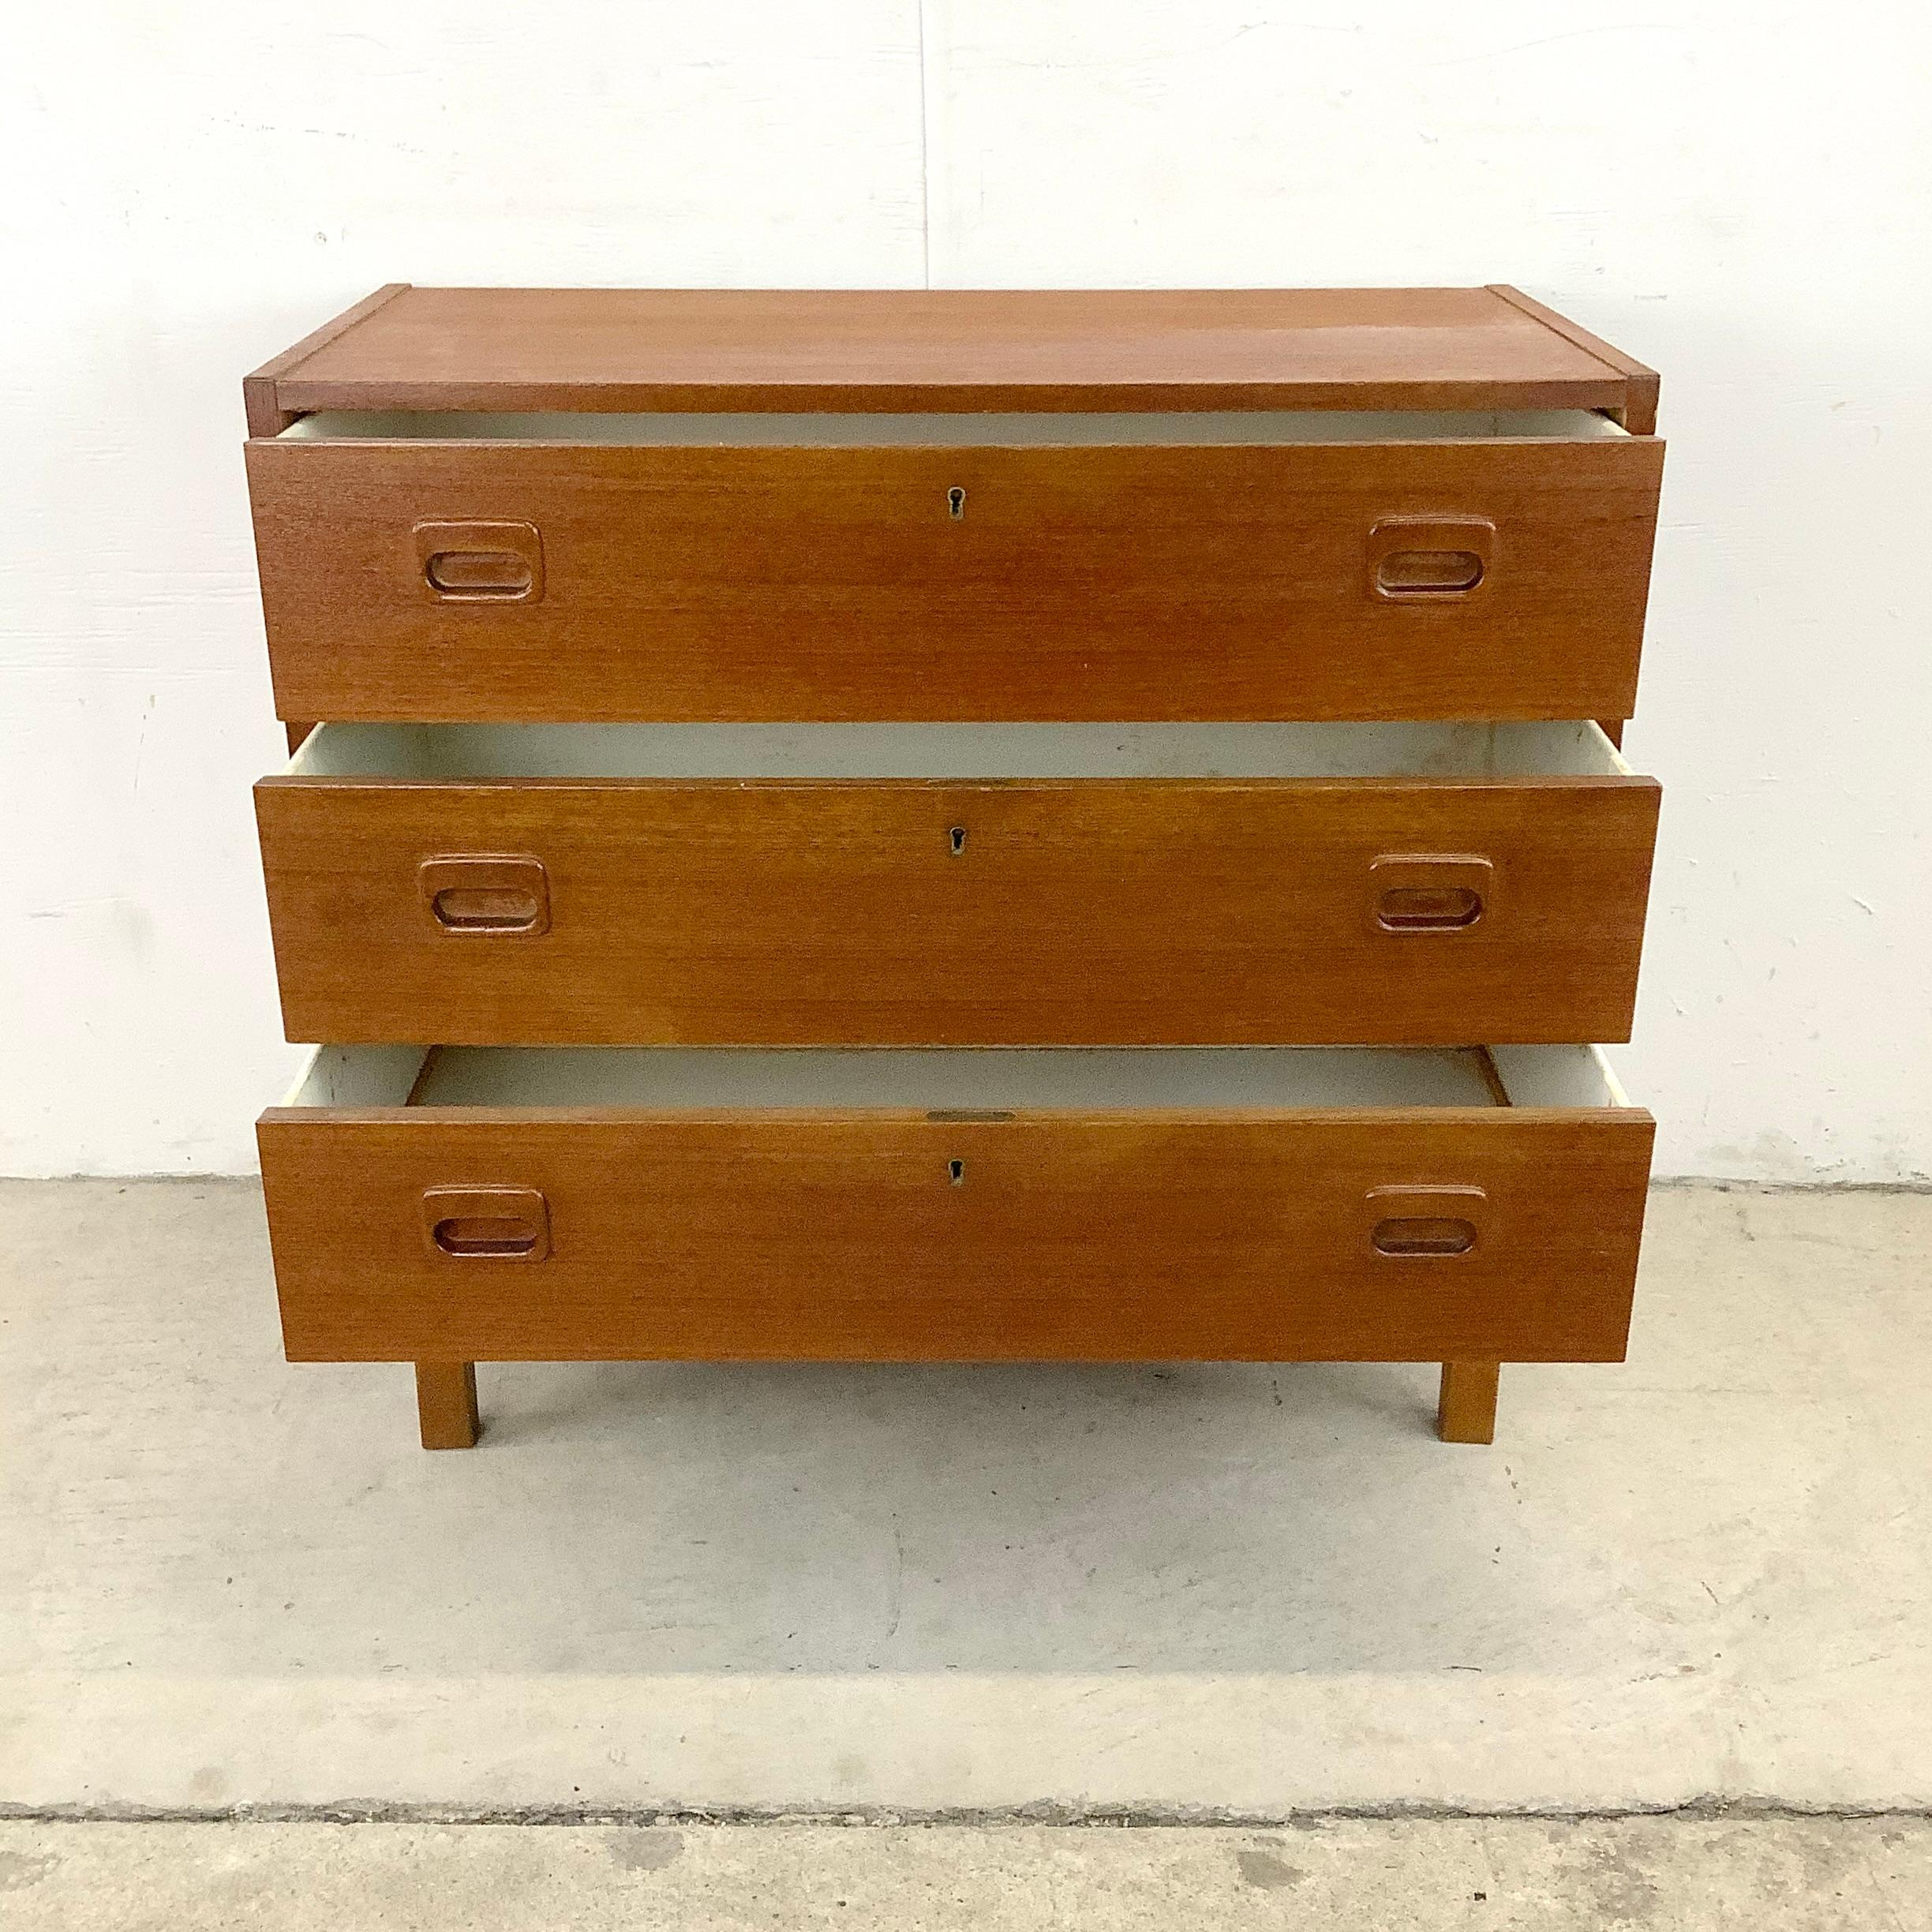 This stylish petite teak three drawer dresser features vintage Scandinavian modern design and makes a striking addition to any interior in need of extra storage or a unique console table option. Perfect vintage teak dresser for space challenged